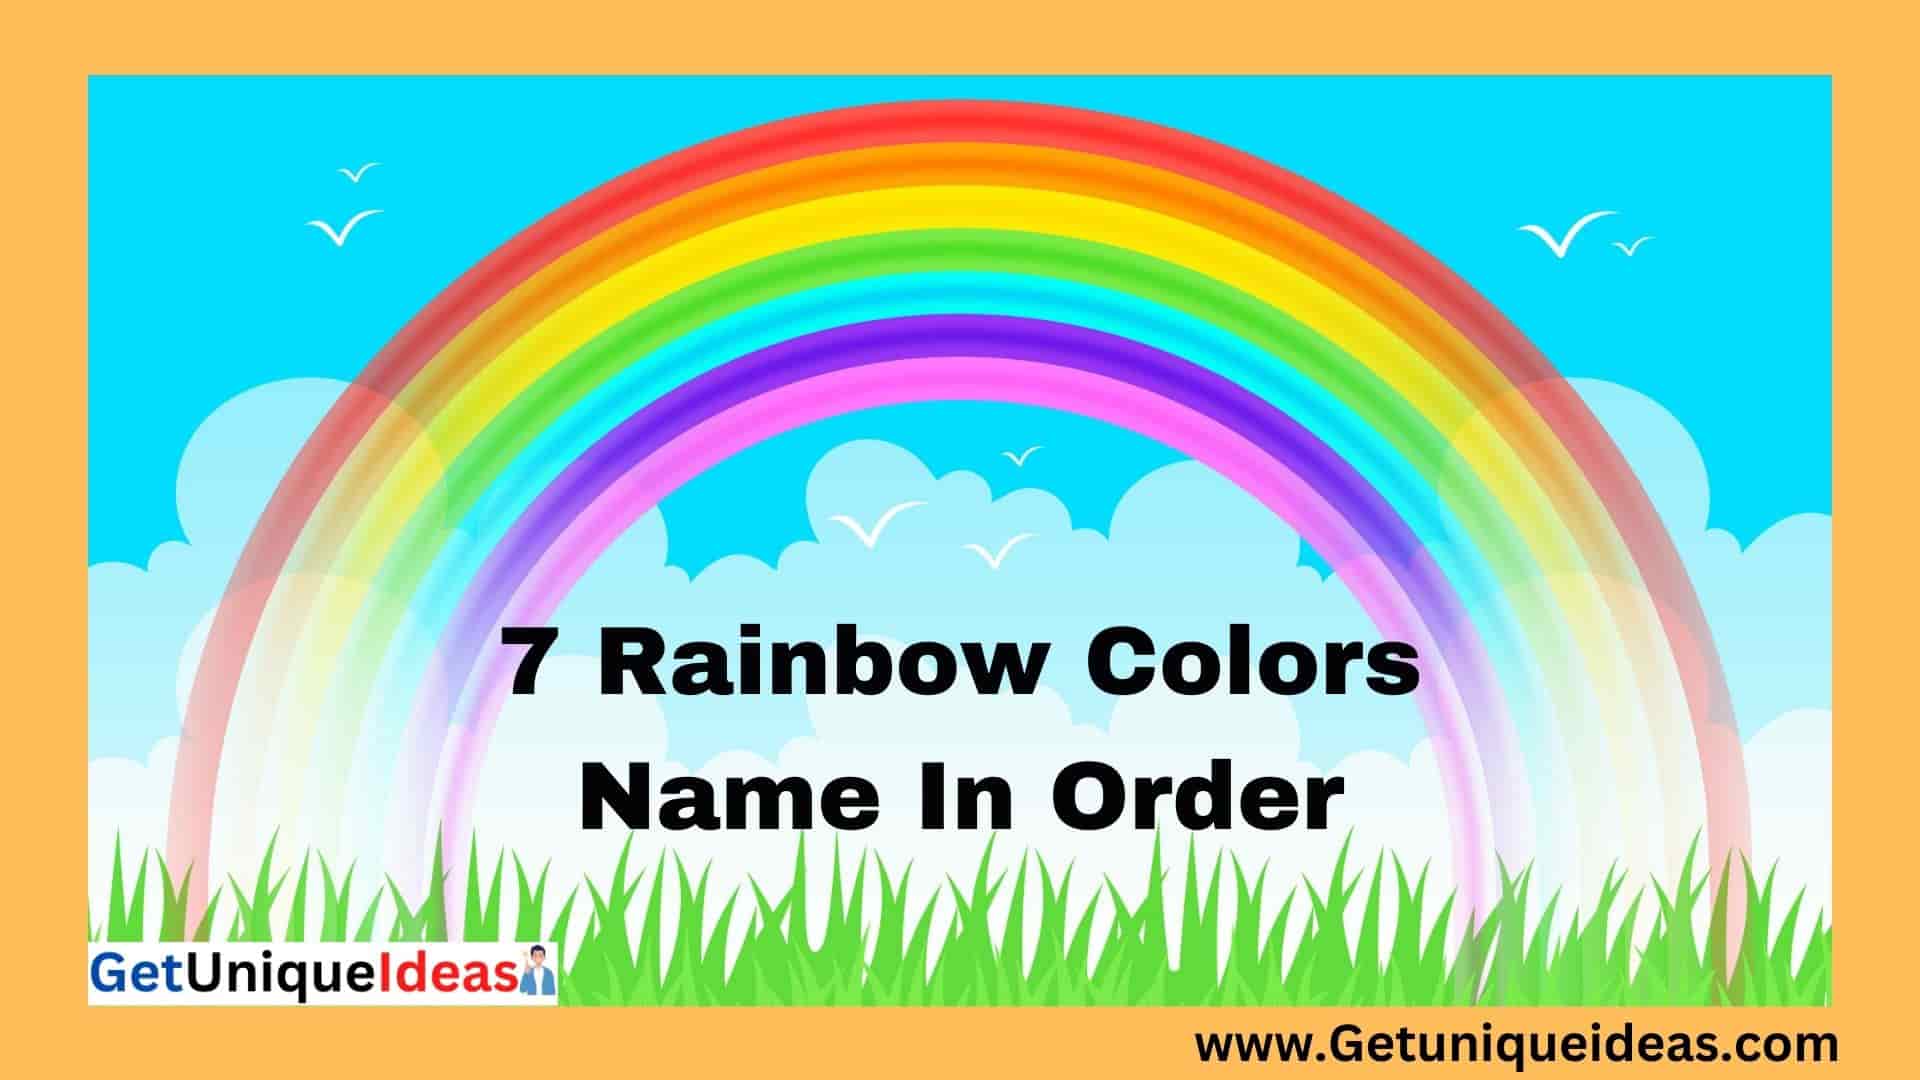 7 Rainbow Colors Name In Order